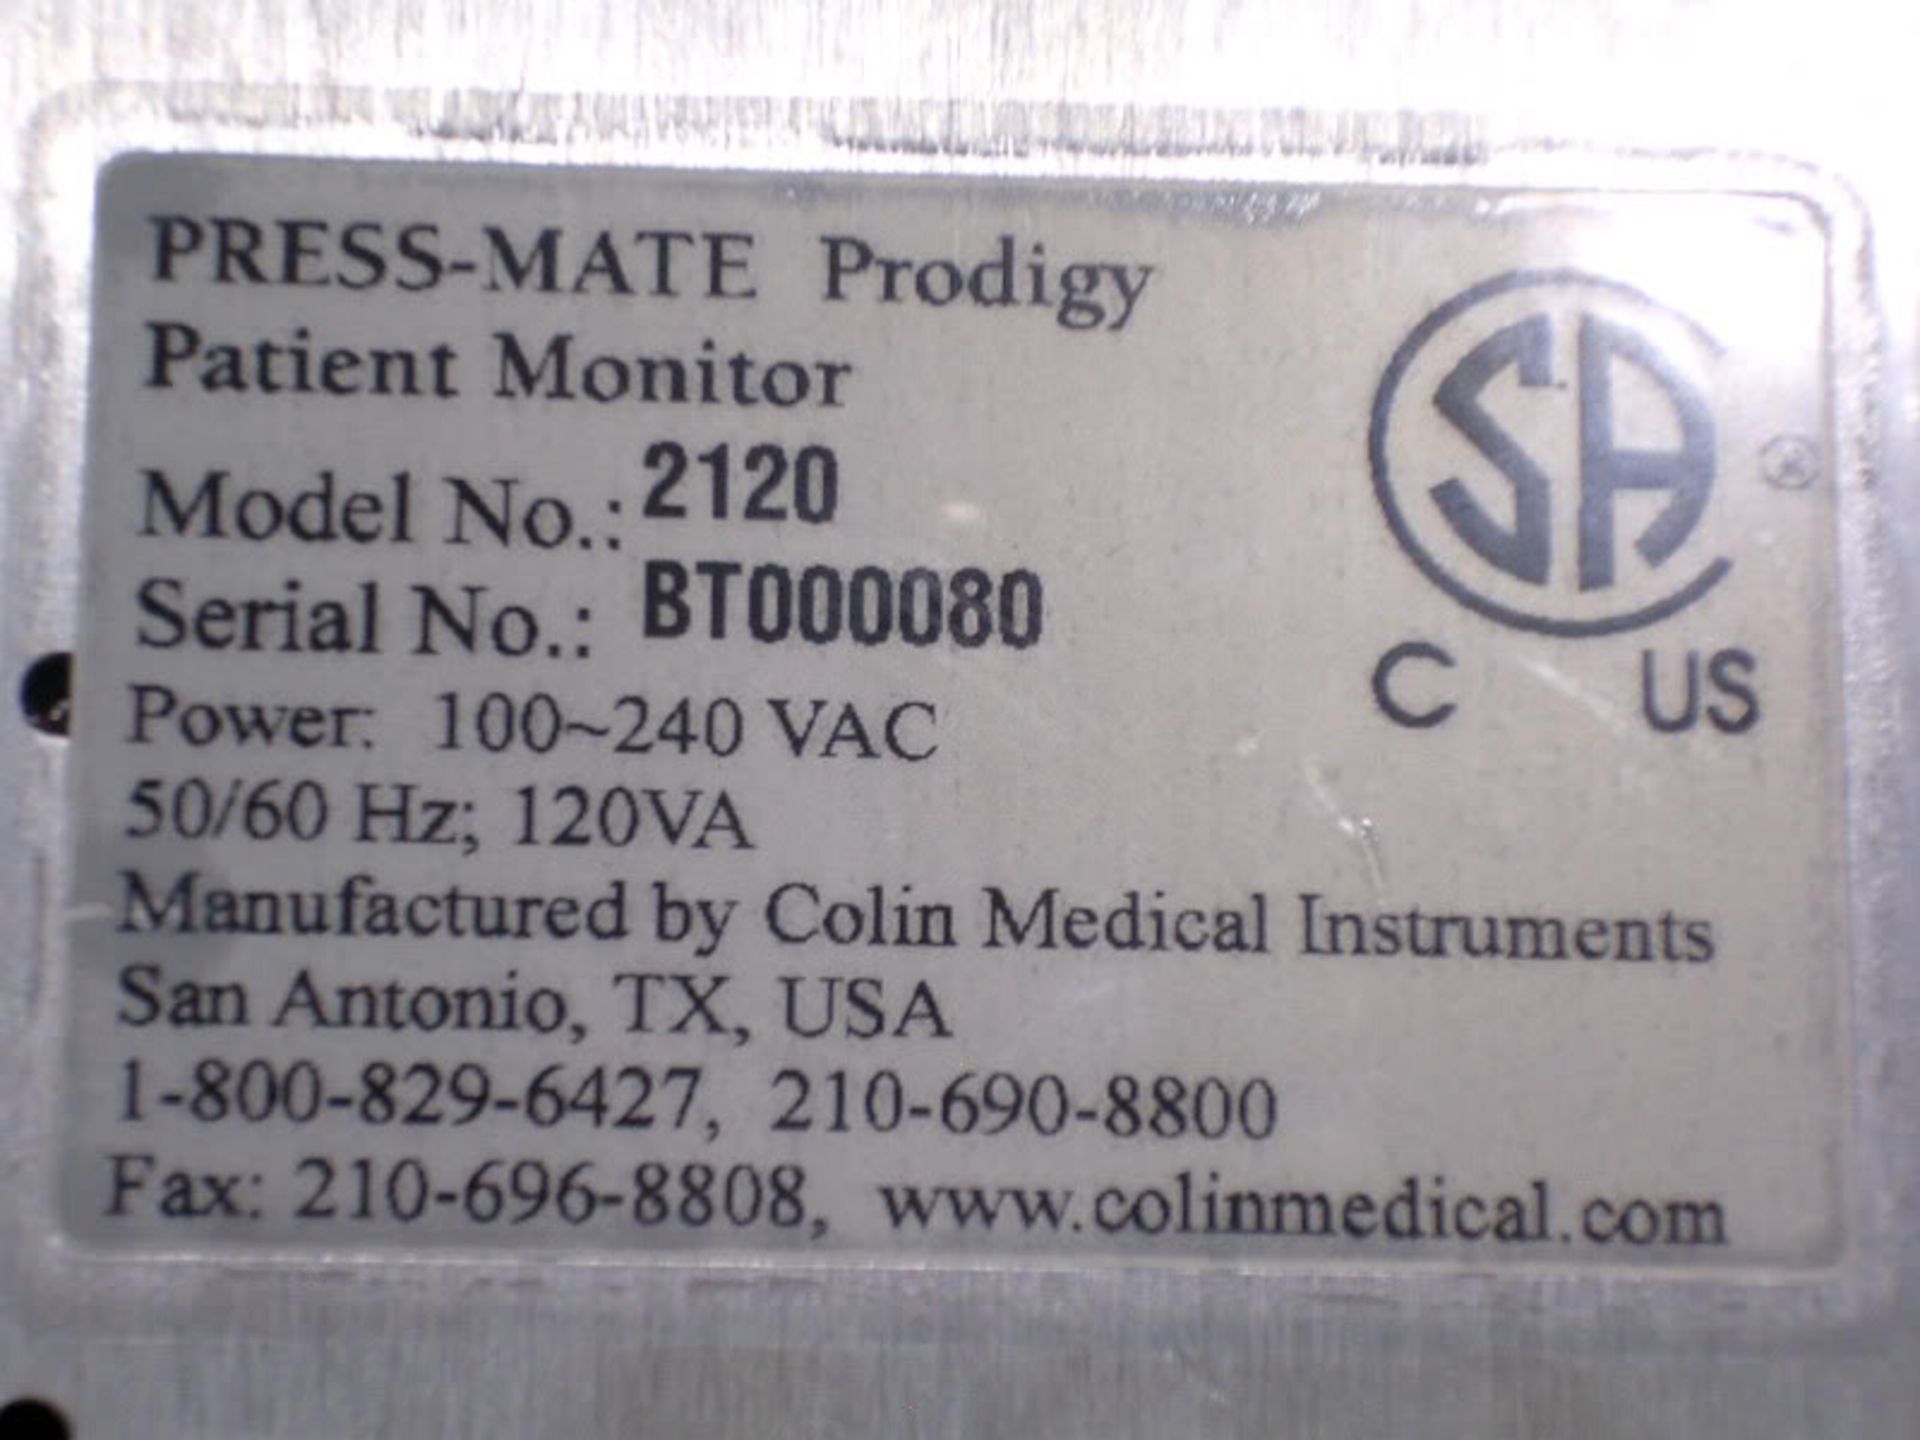 Colin/ Press-Mate, Prodigy Patient Monitor, Model 2120, Qty 1, 220691980619 - Image 8 of 8